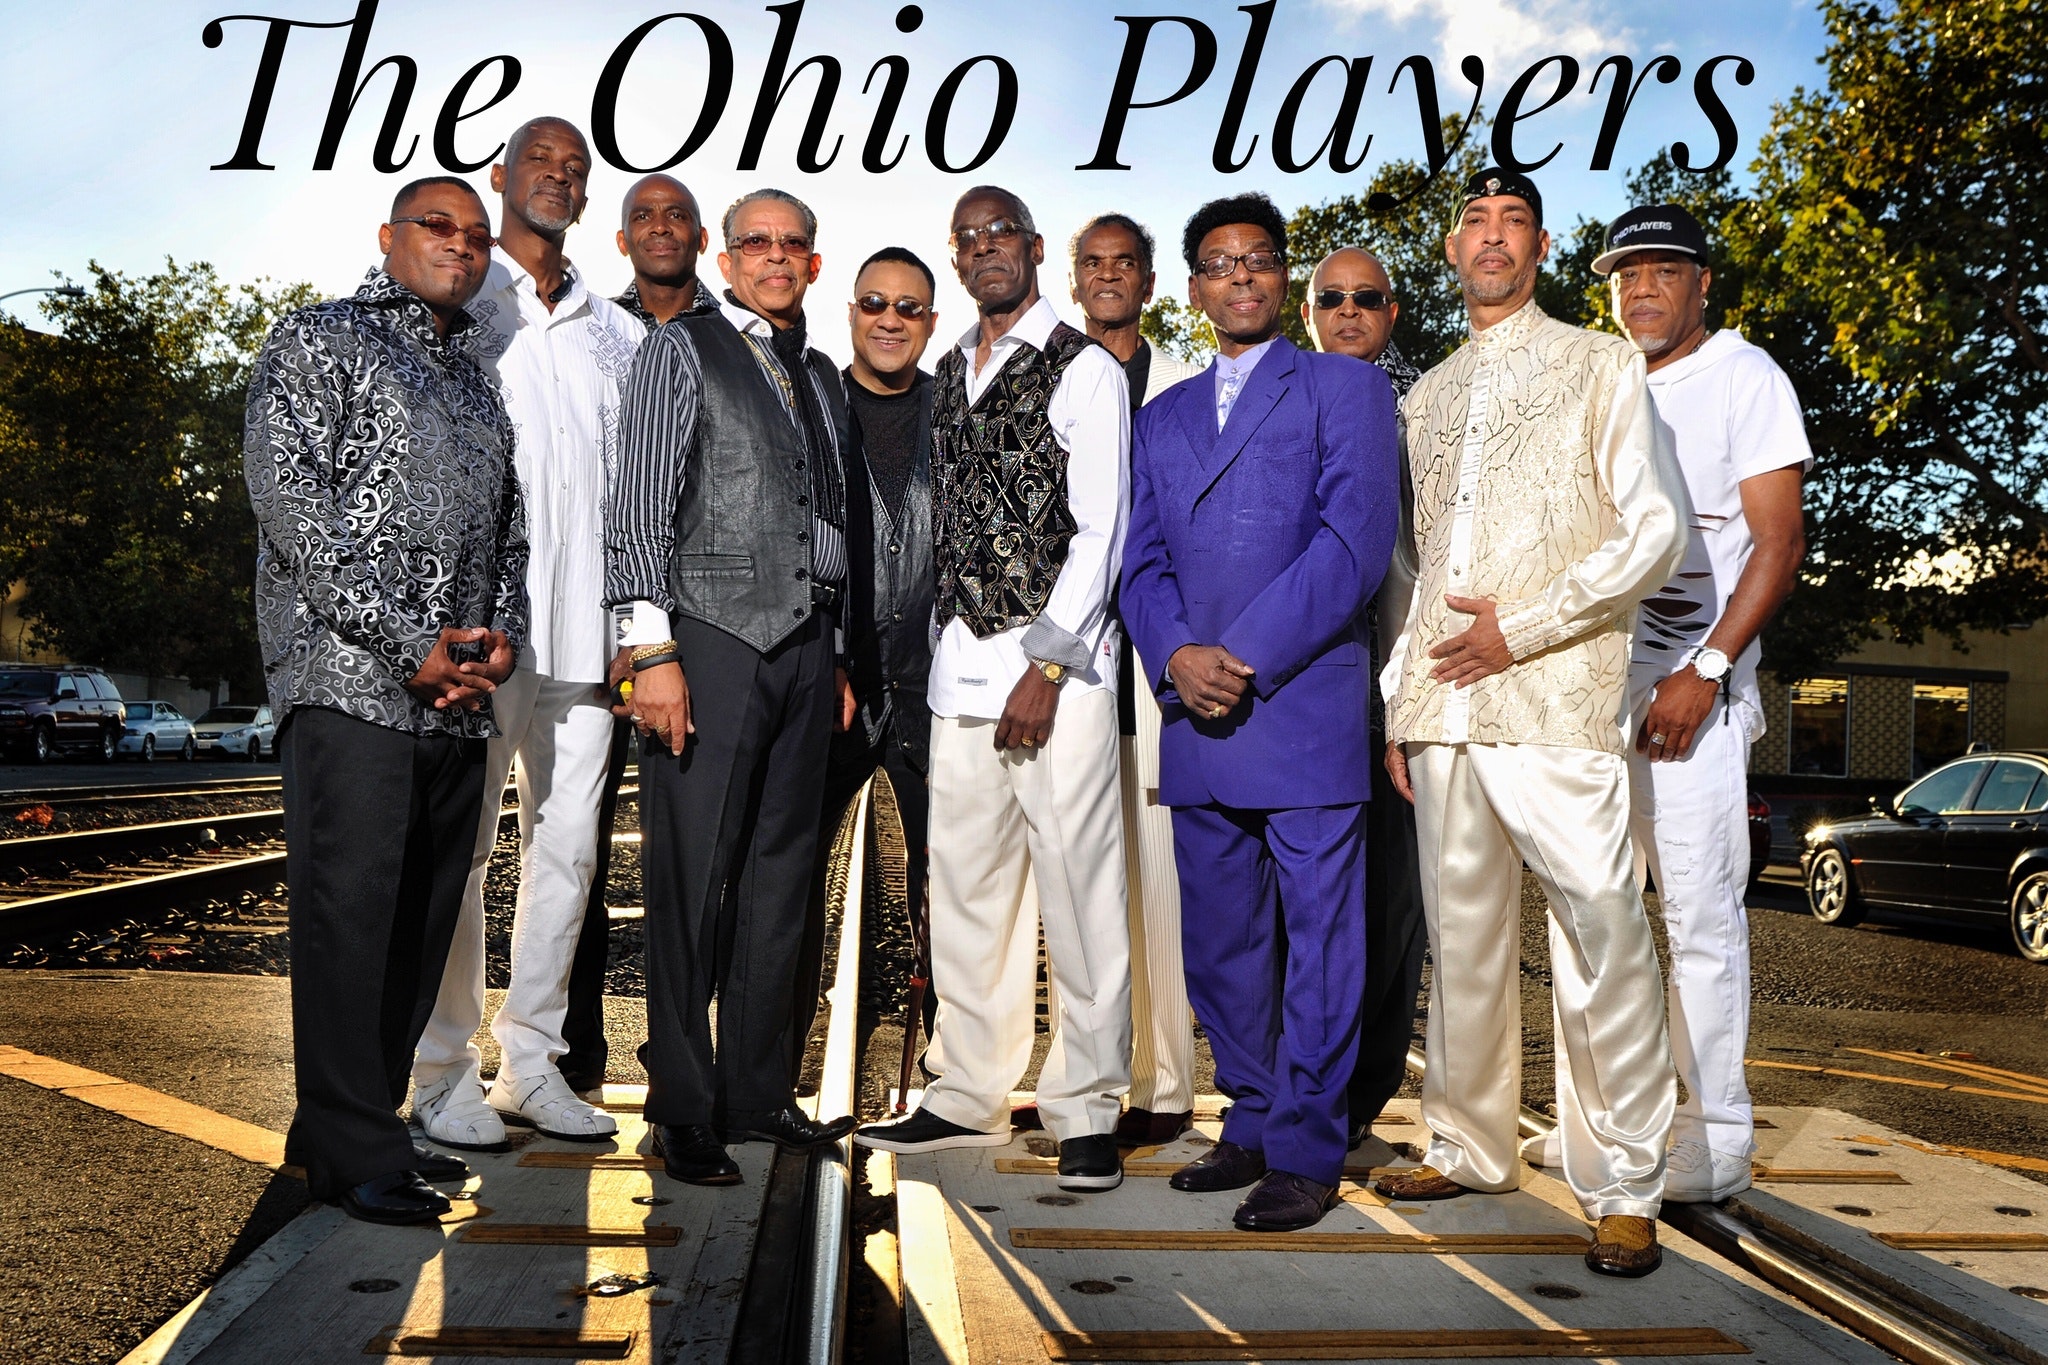 The Number Ones: Ohio Players' “Love Rollercoaster”